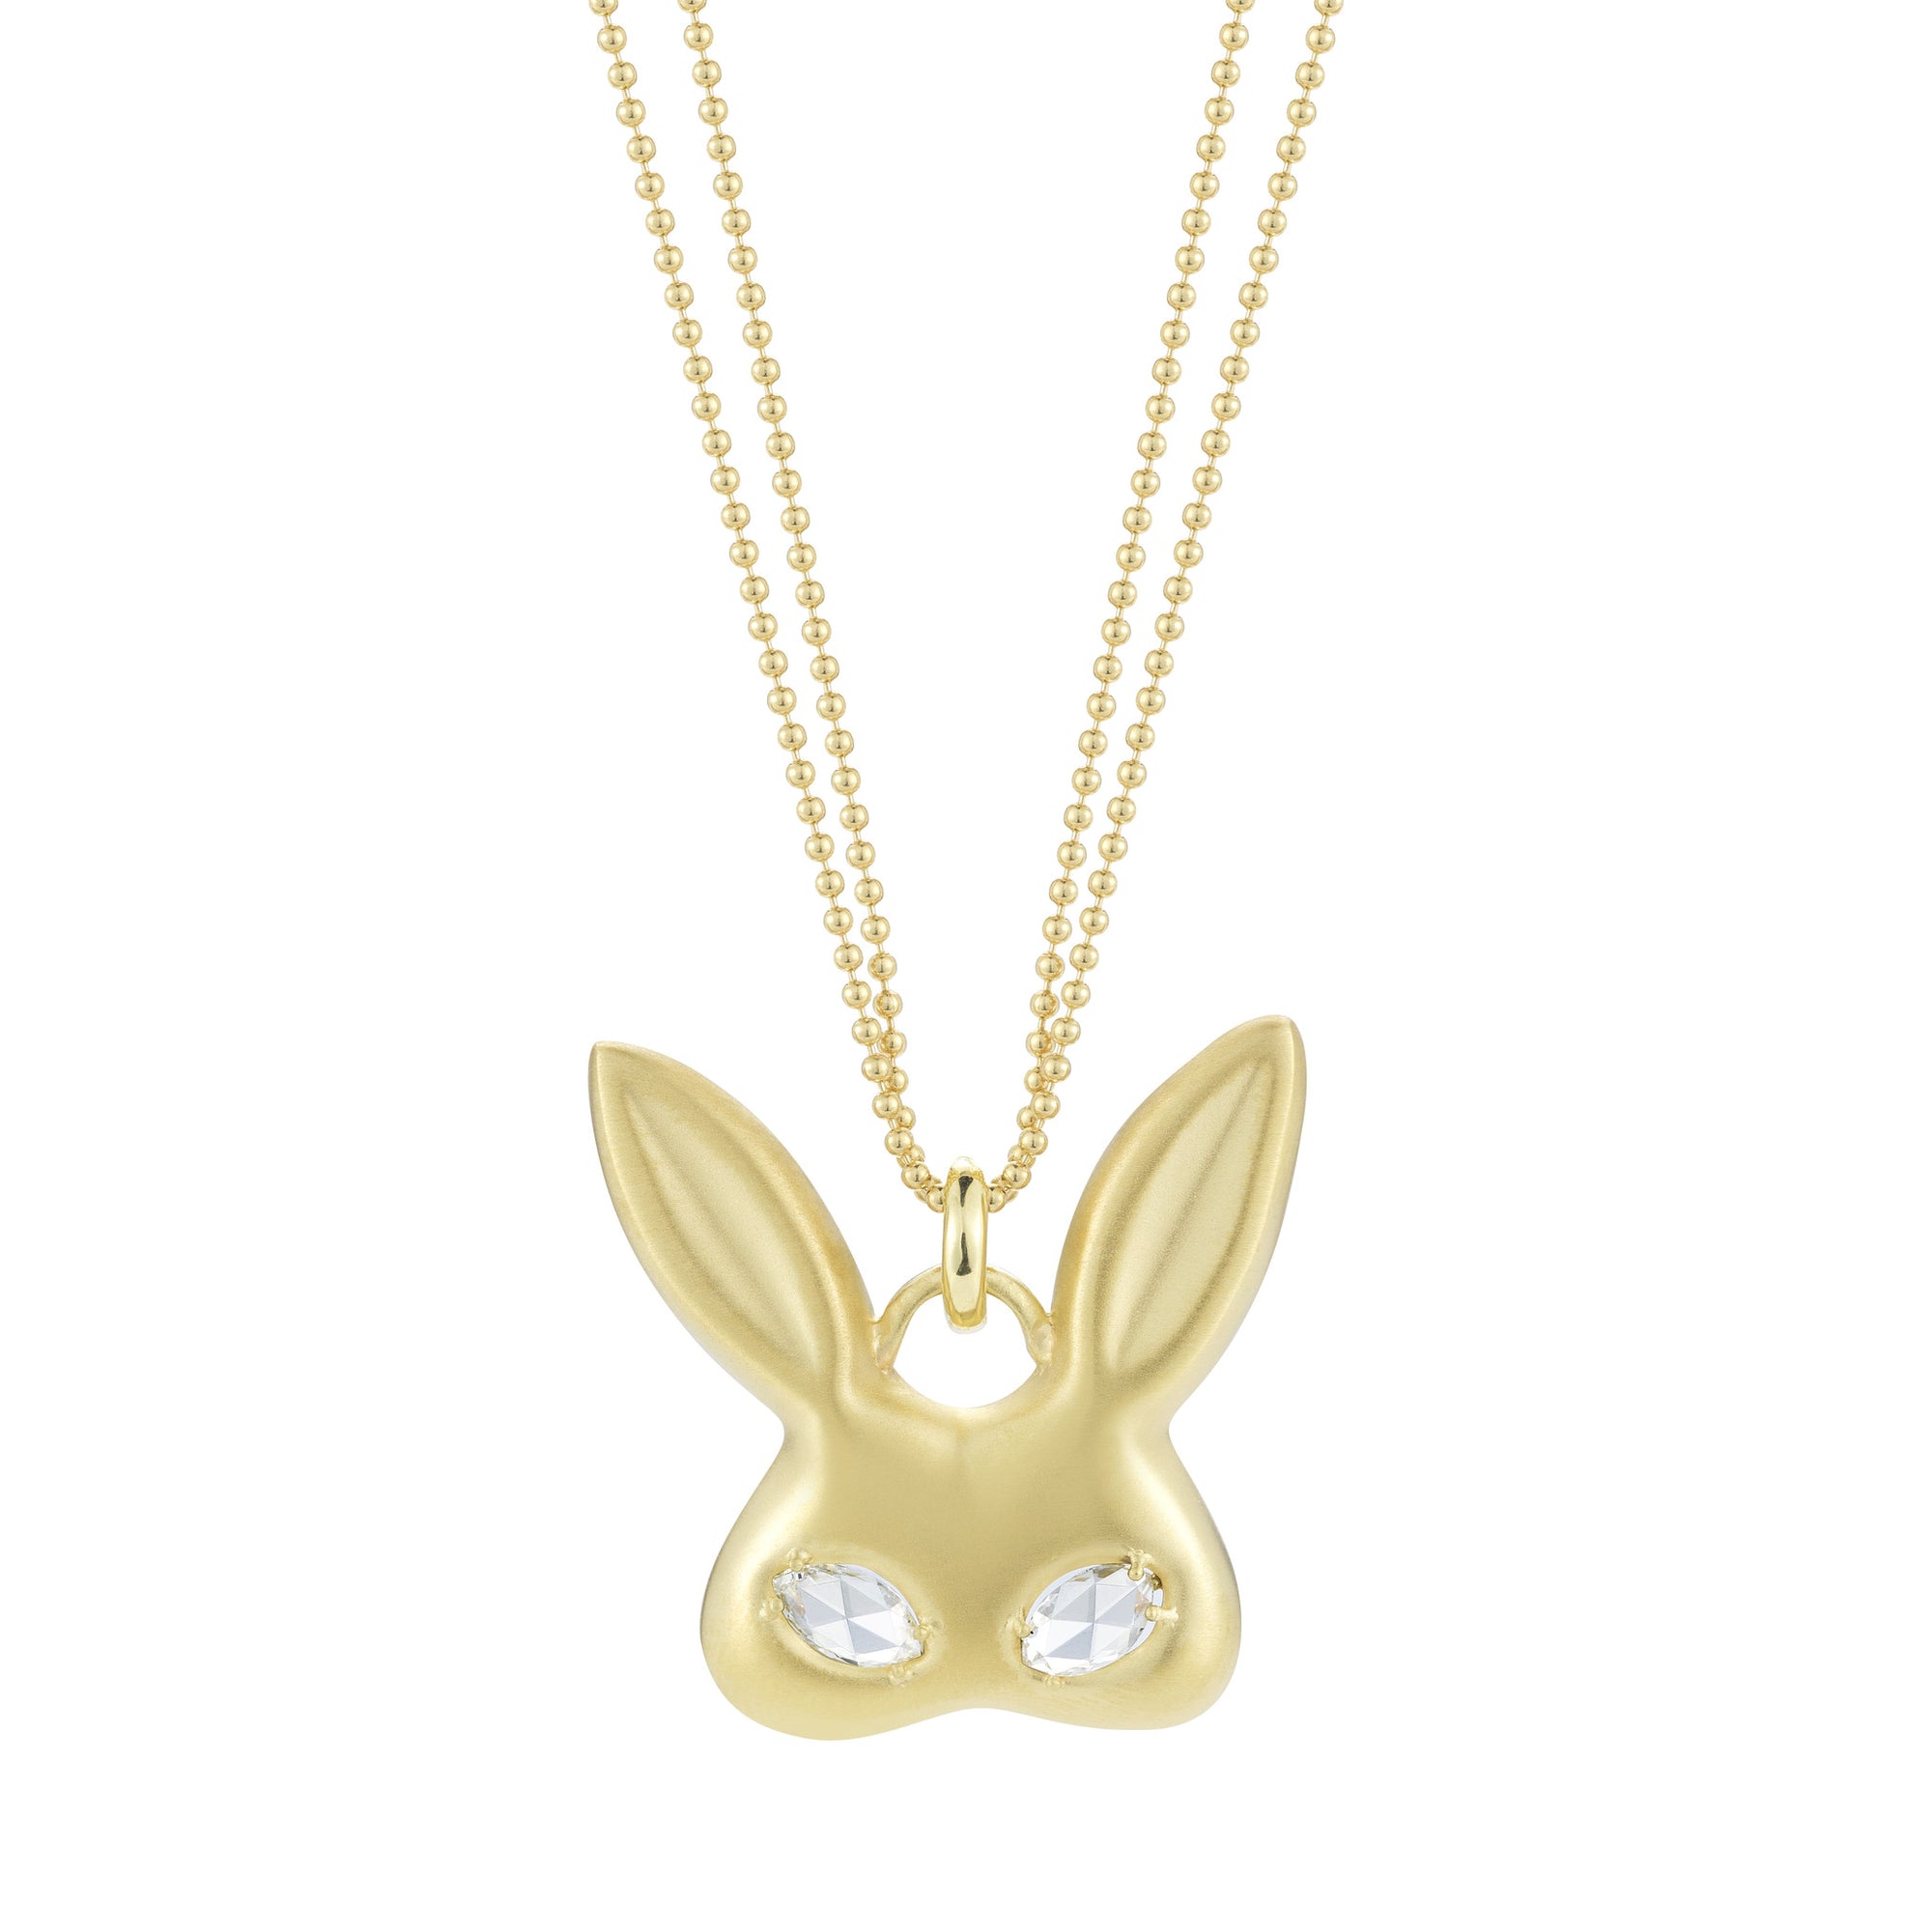 18k gold rabbit bunny costume mask pendant with diamond eyes on wrapped chain by finn by candice pool neistat